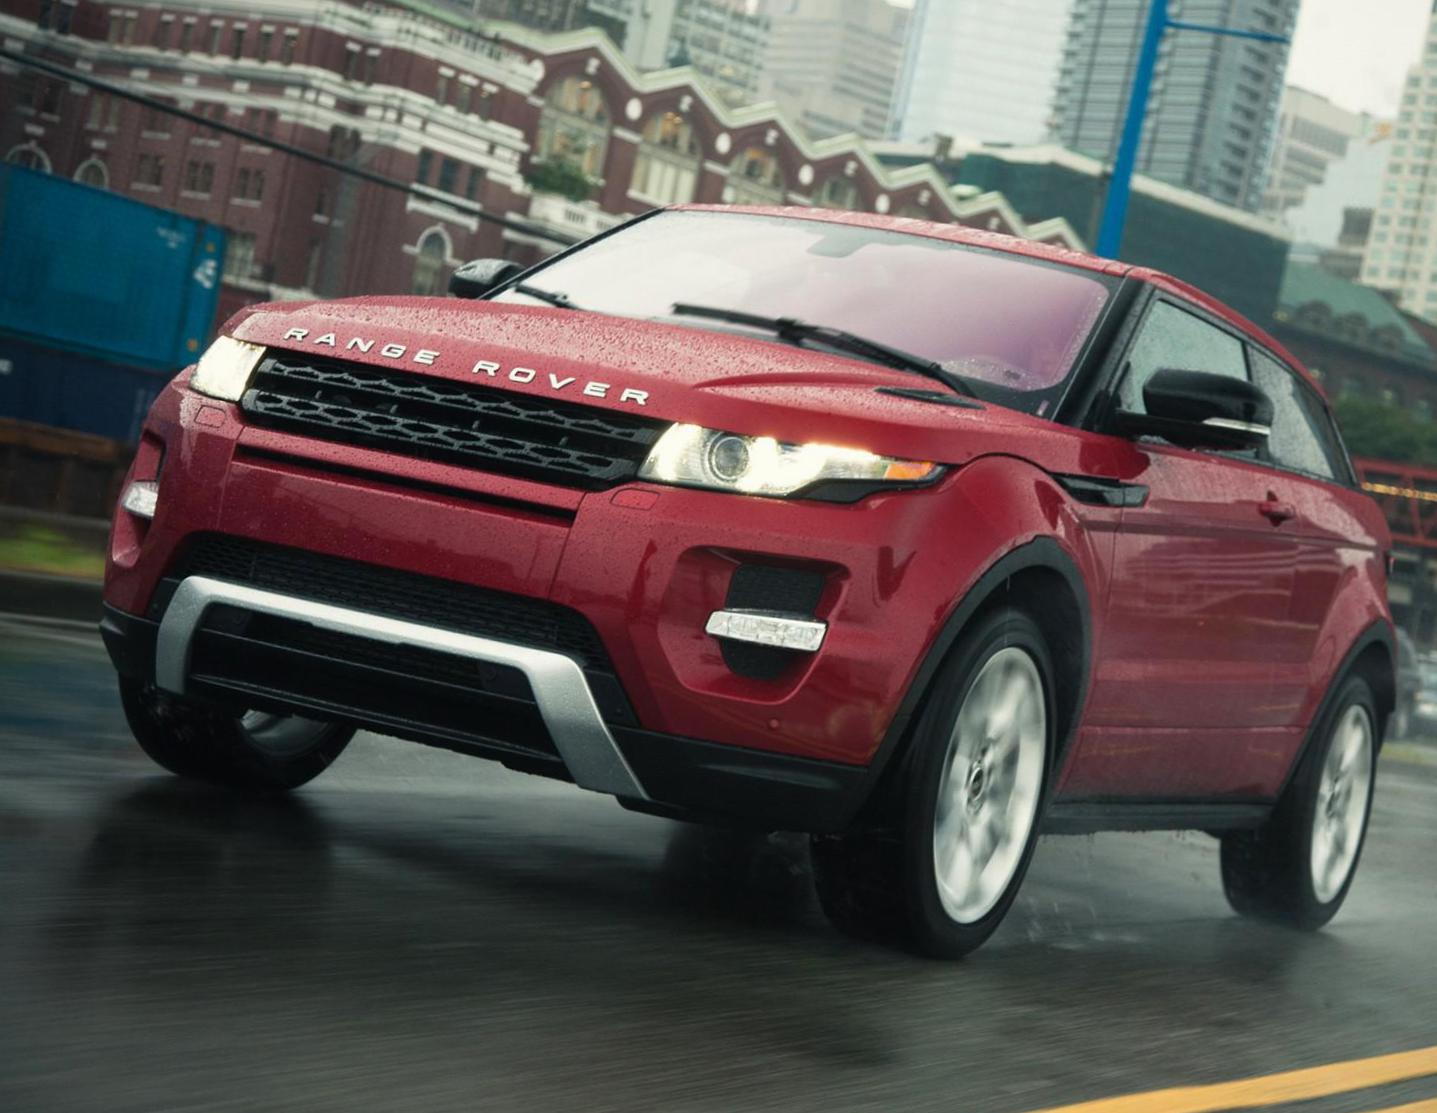 Land Rover Range Rover Evoque approved 2013